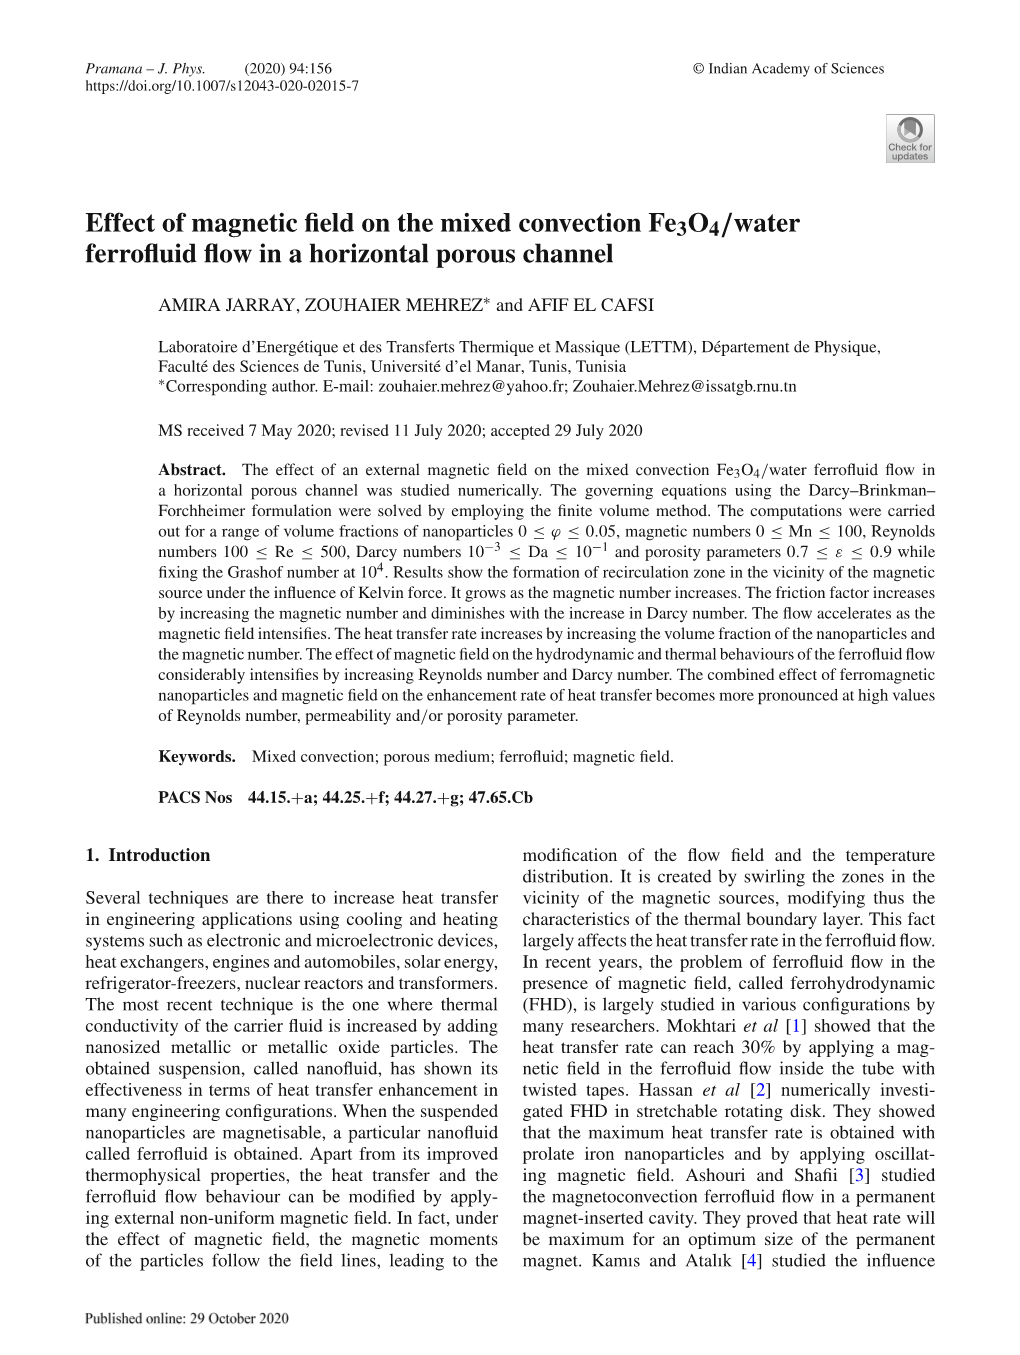 Effect of Magnetic Field on the Mixed Convection Ferrofluid Flow in A